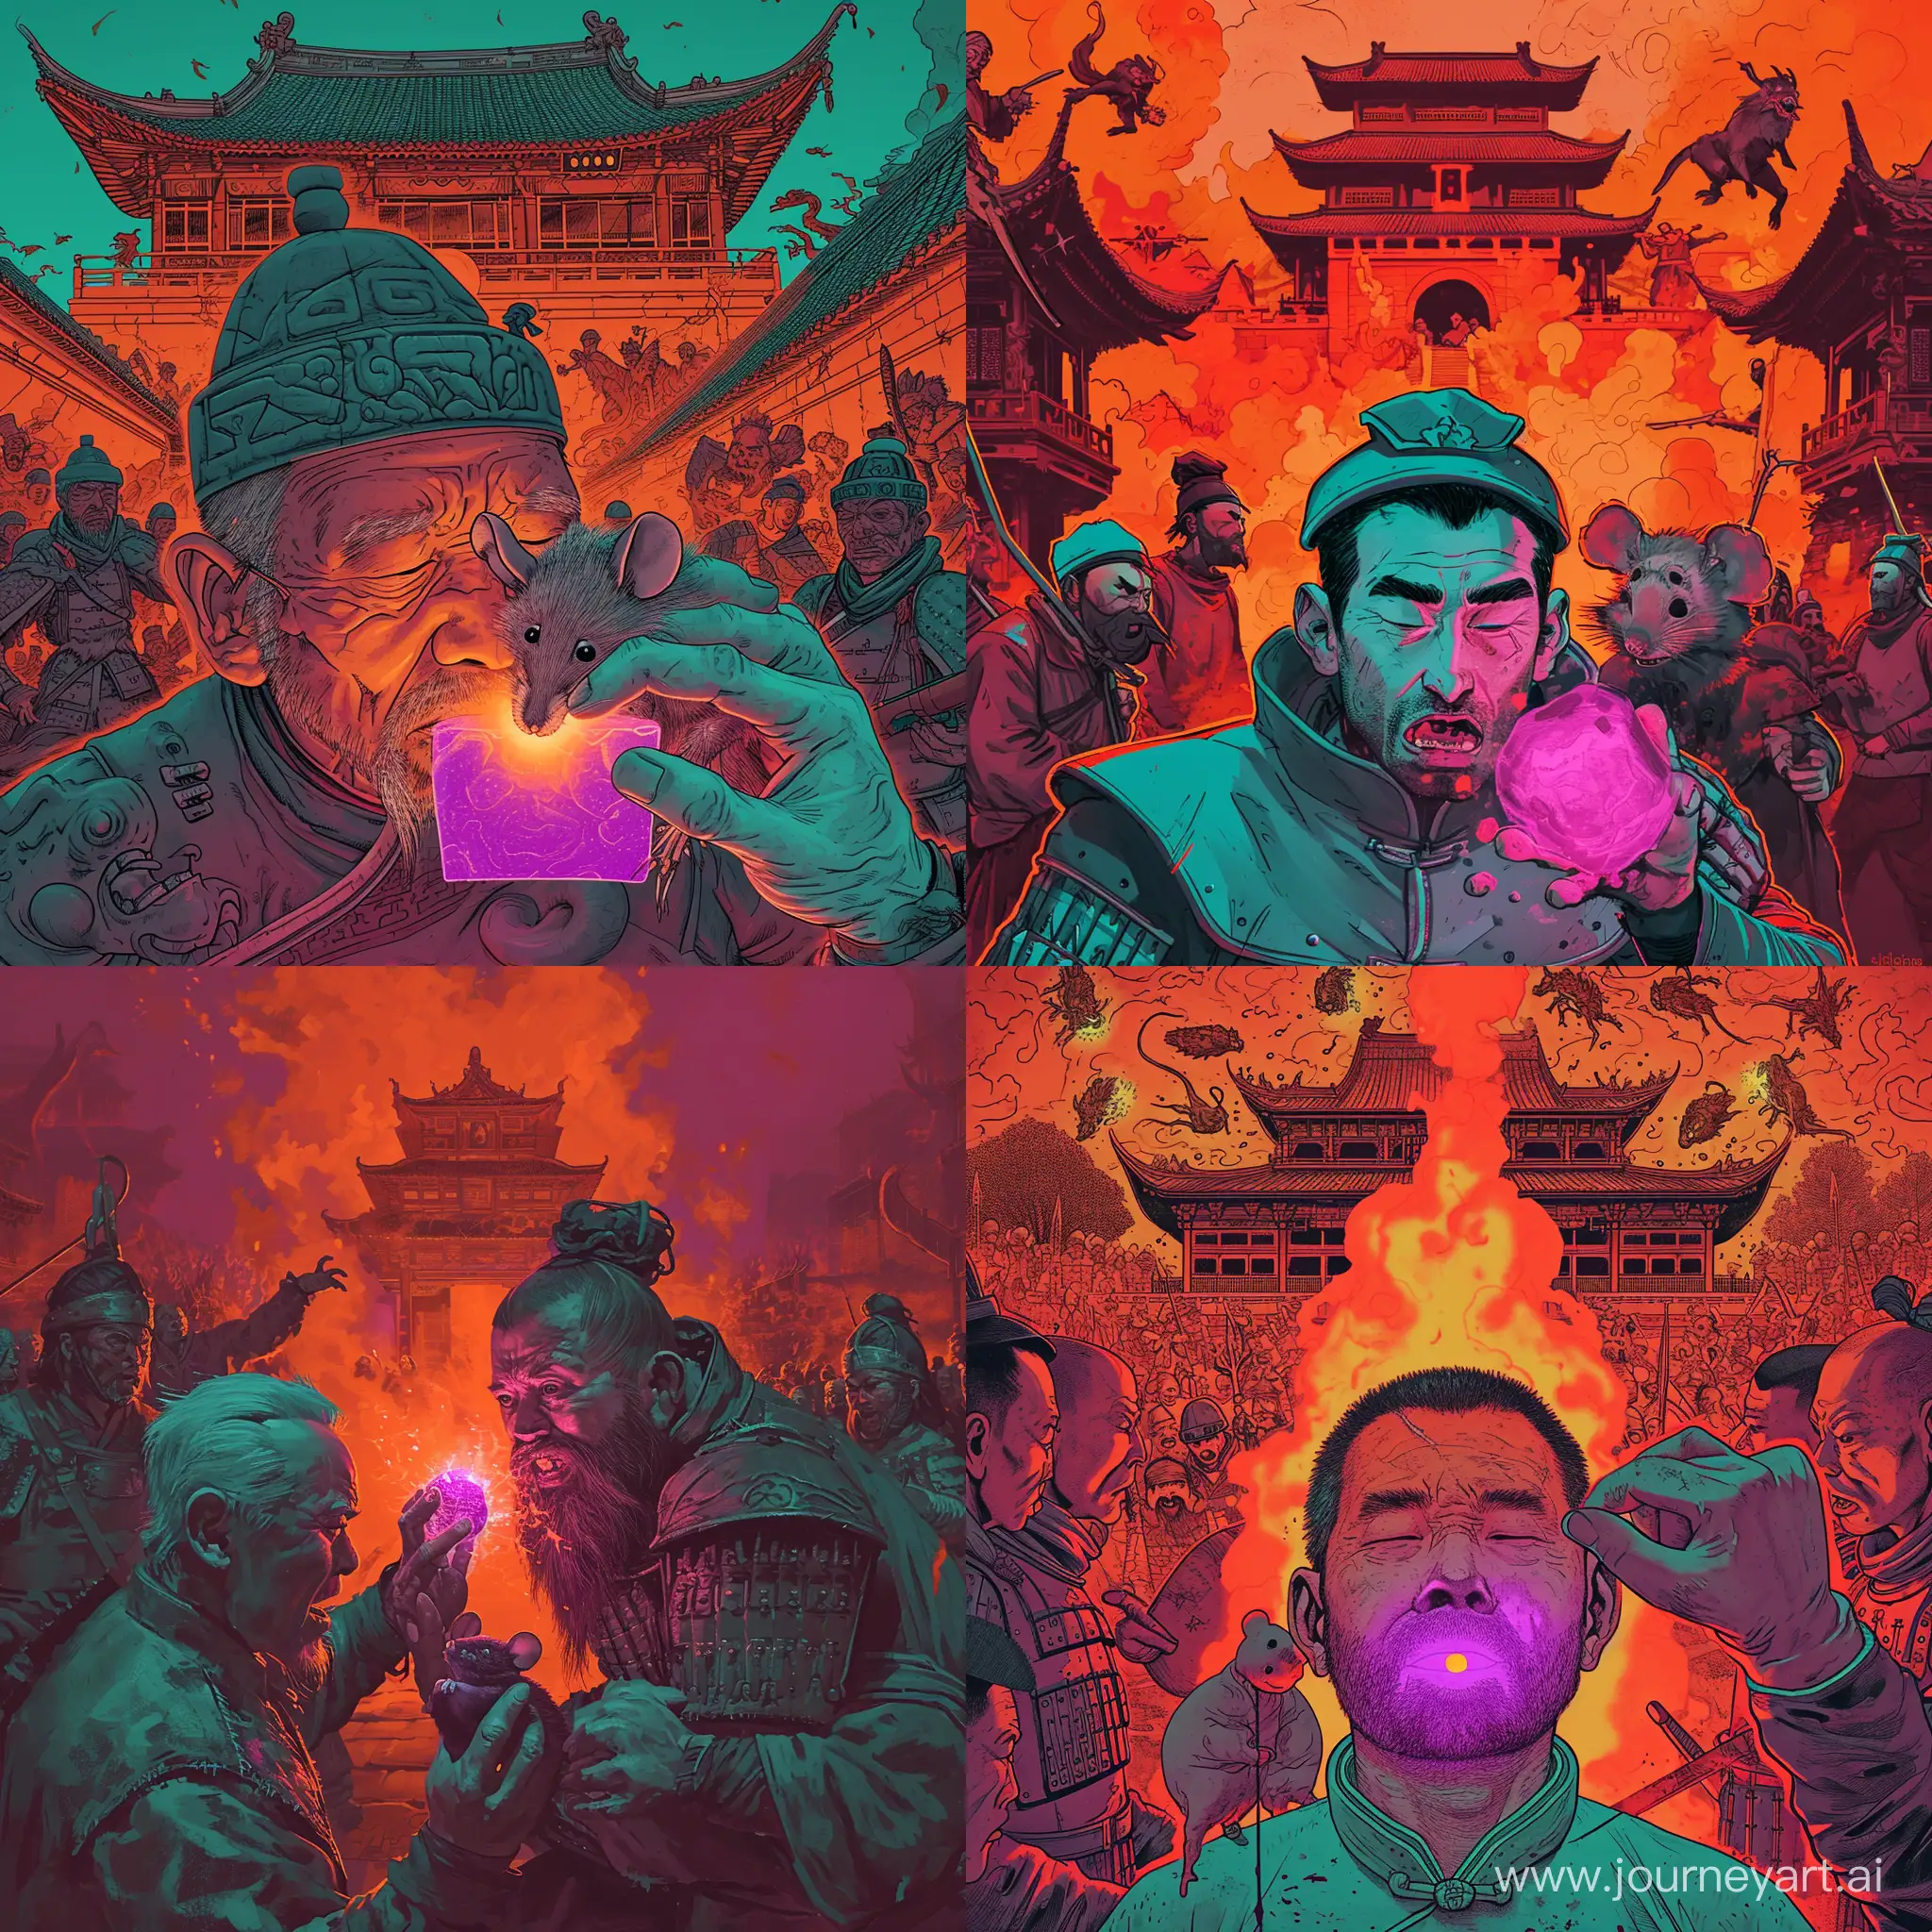 Fiery-Red-Cult-Temple-Medieval-Chinese-Soldier-Shrinks-Charles-Hoskinson-with-Glowing-Stone